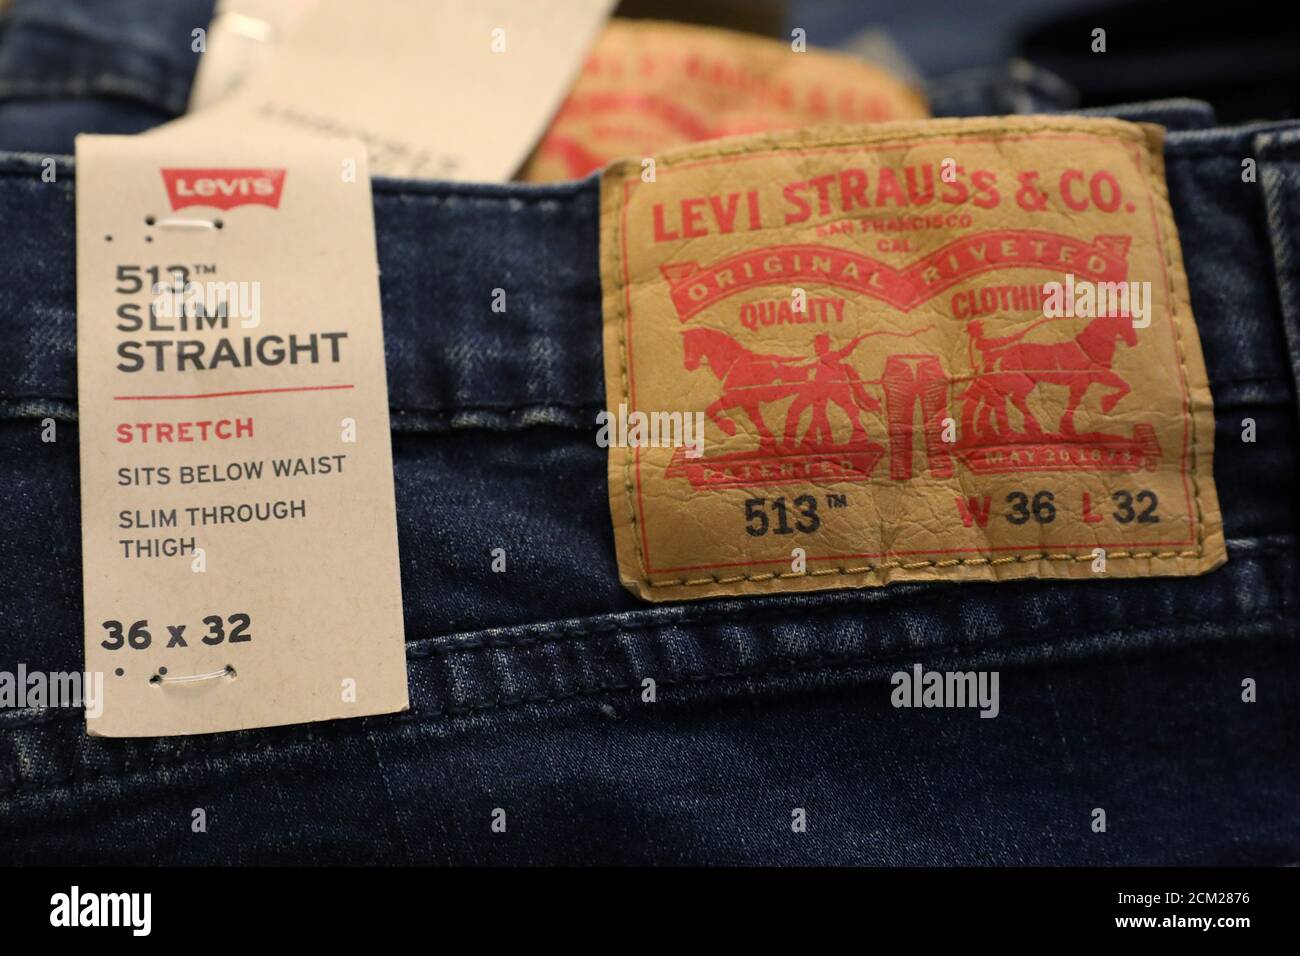 Levi's denim jeans are displayed in the Levi Strauss store at Macy's  Department store in New York City, ., March 11, 2019. REUTERS/Brendan  McDermid Stock Photo - Alamy